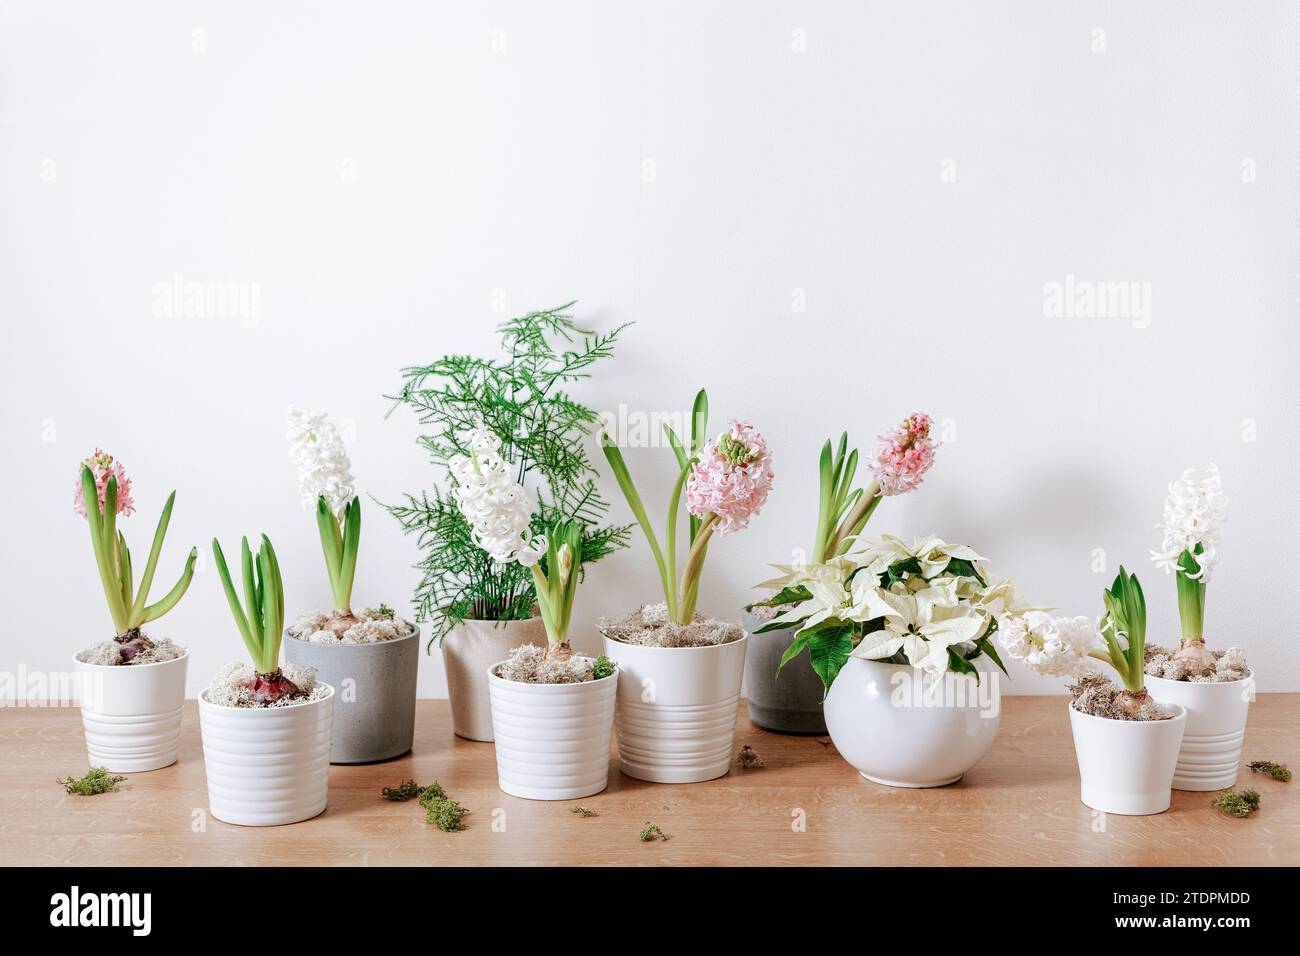 white pink hyacinth traditional winter christmas or spring flower Stock Photo